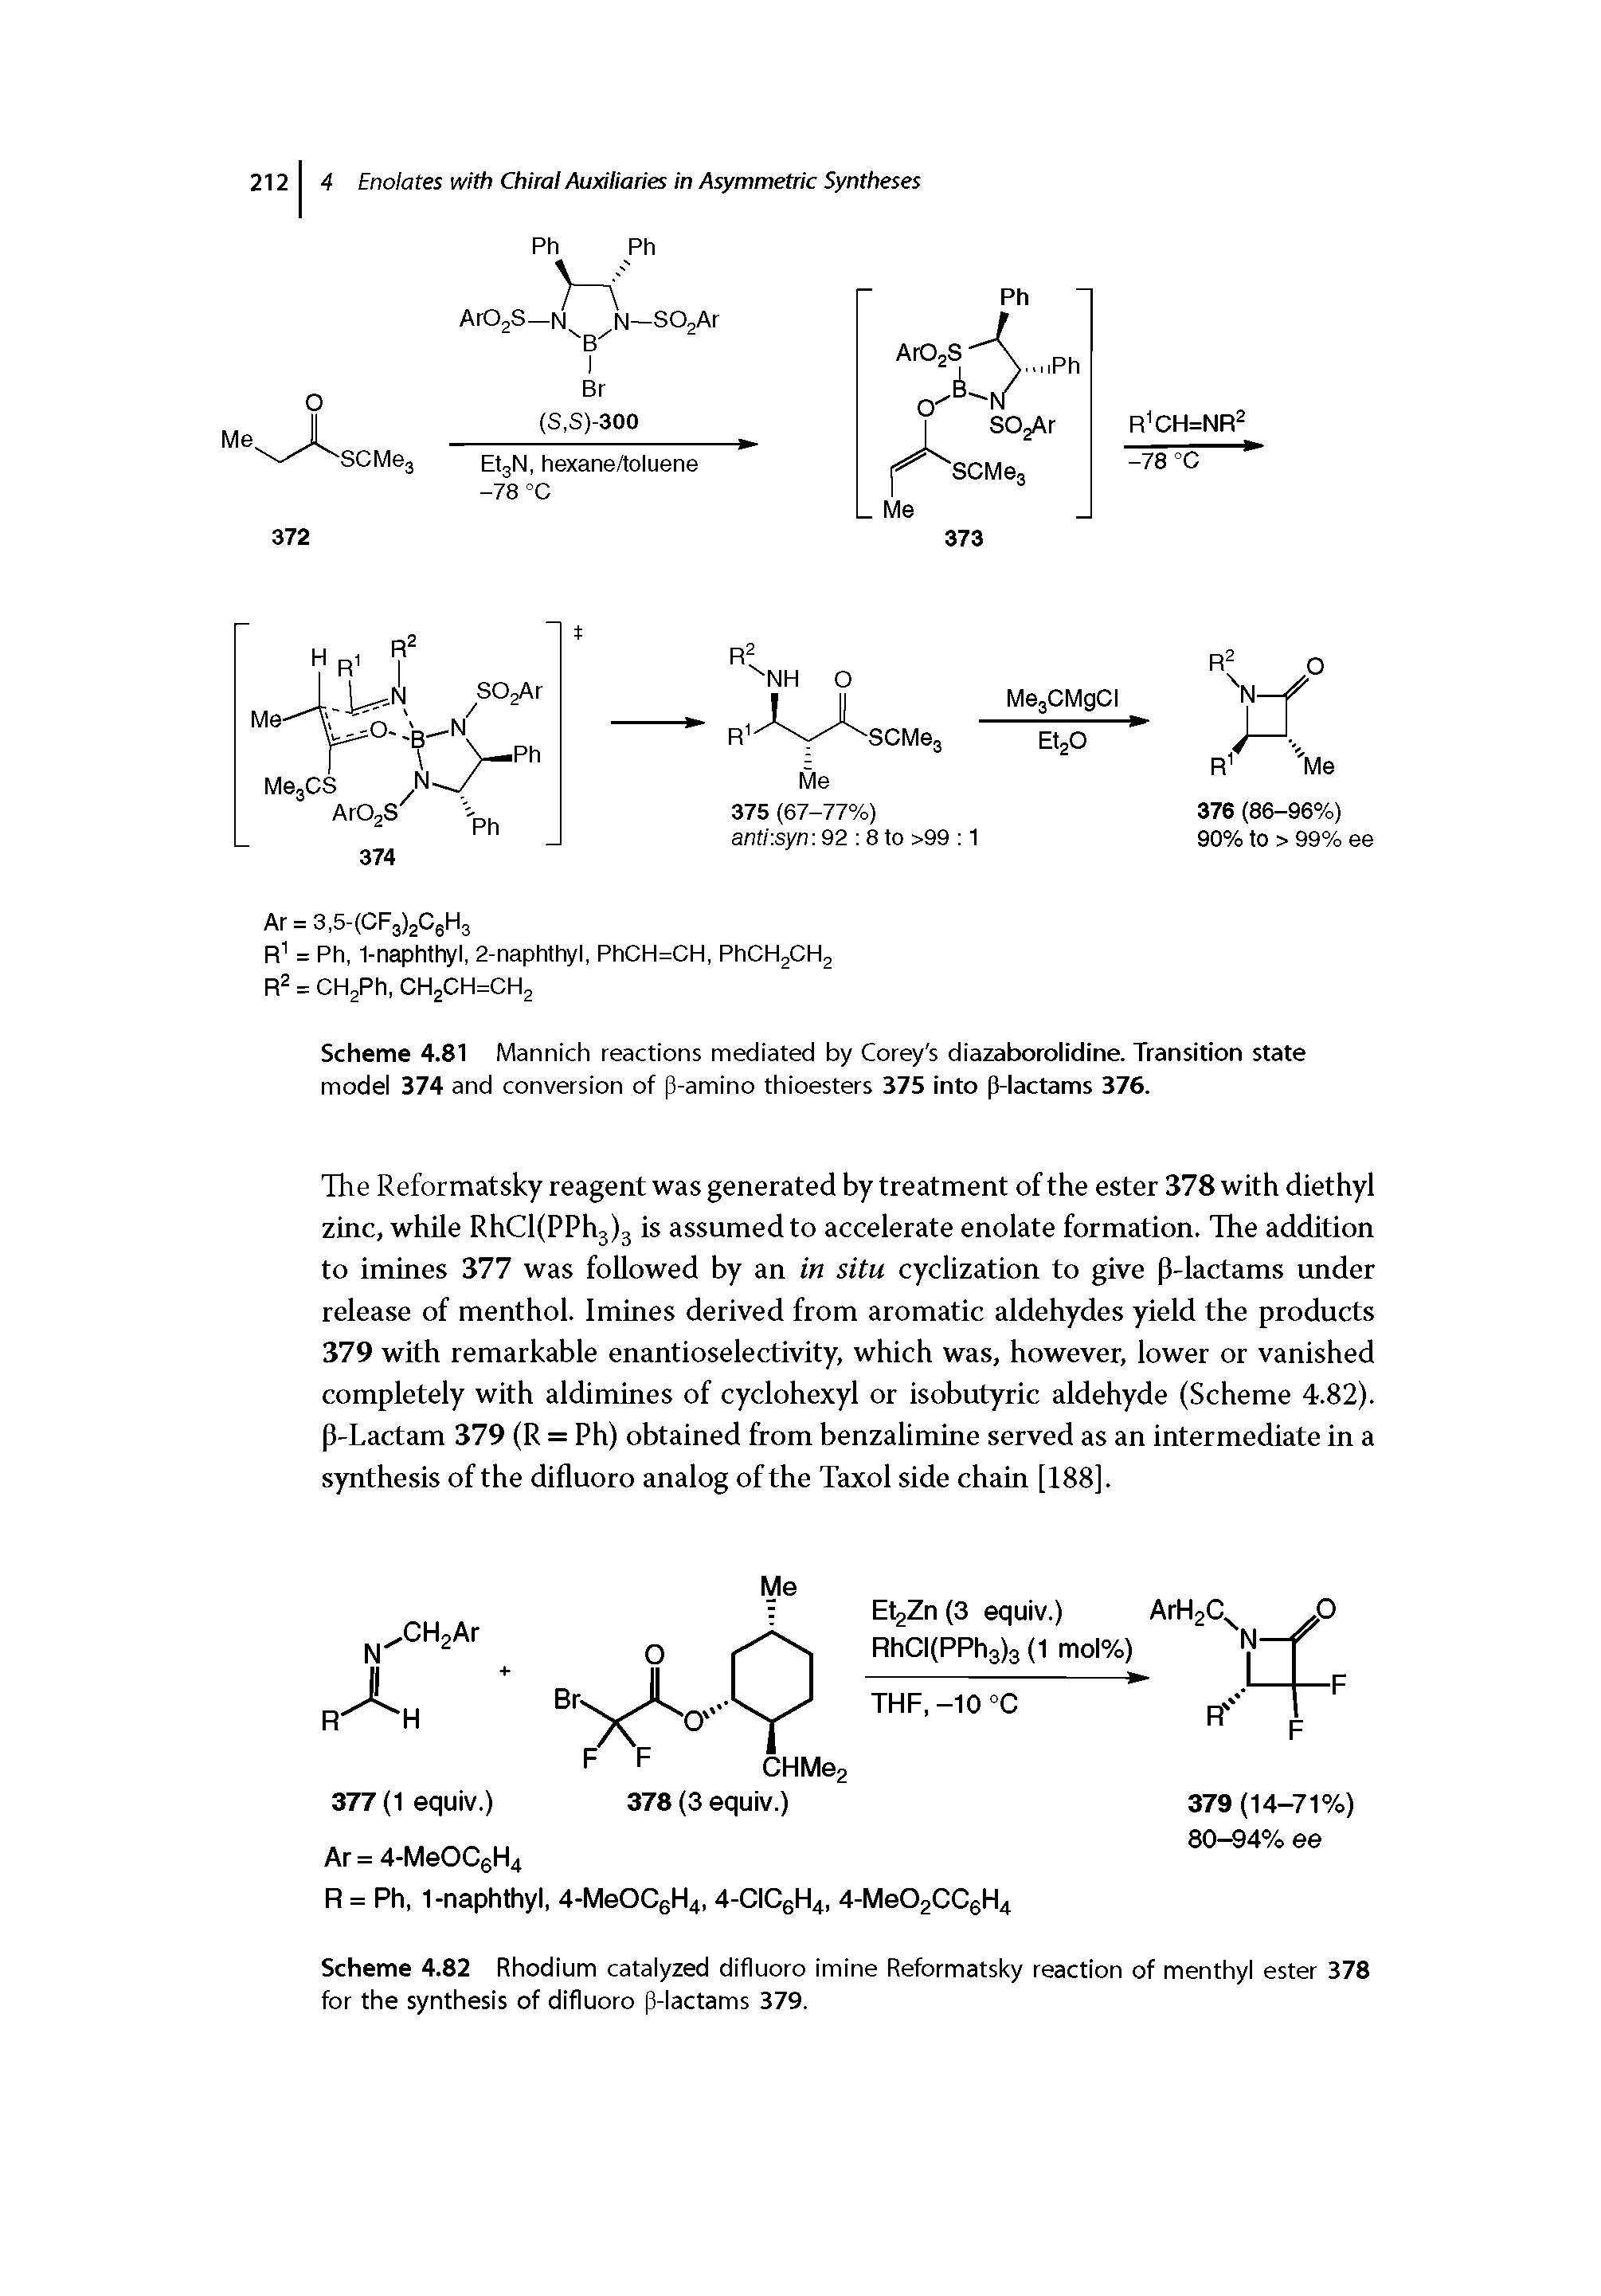 Scheme 4.82 Rhodium catalyzed difluoro imine Reformatsky reaction of menthyl ester 378 for the synthesis of difluoro p-lactams 379.